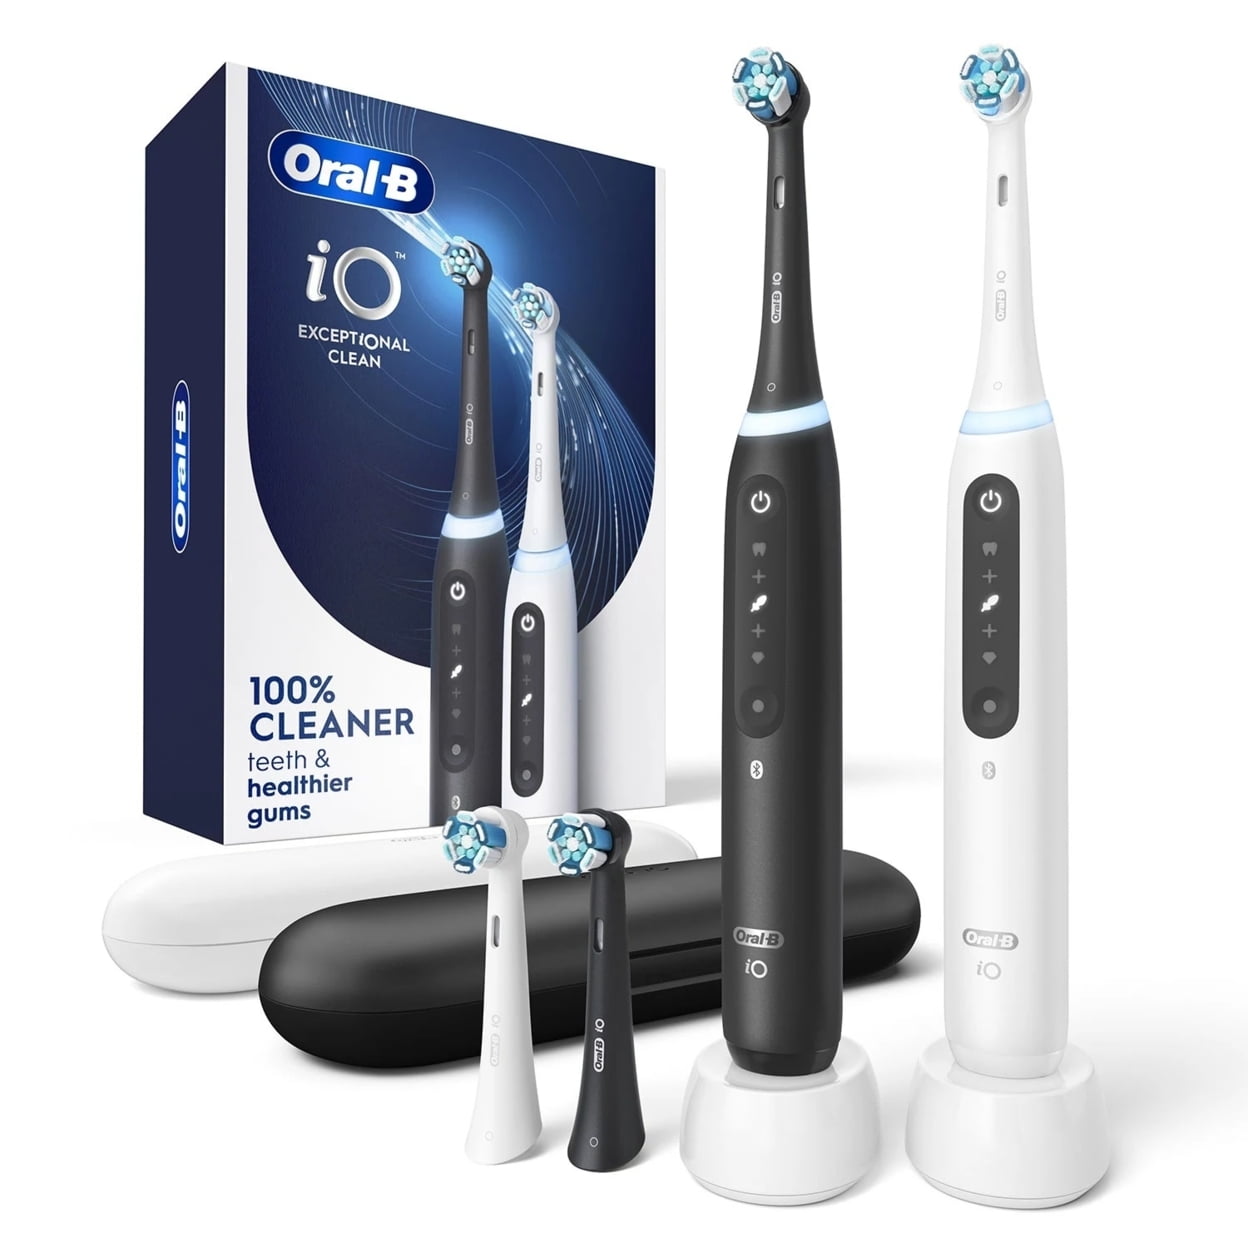 Oral-B iO Series Rechargeable Pack 5 Toothbrush Dual